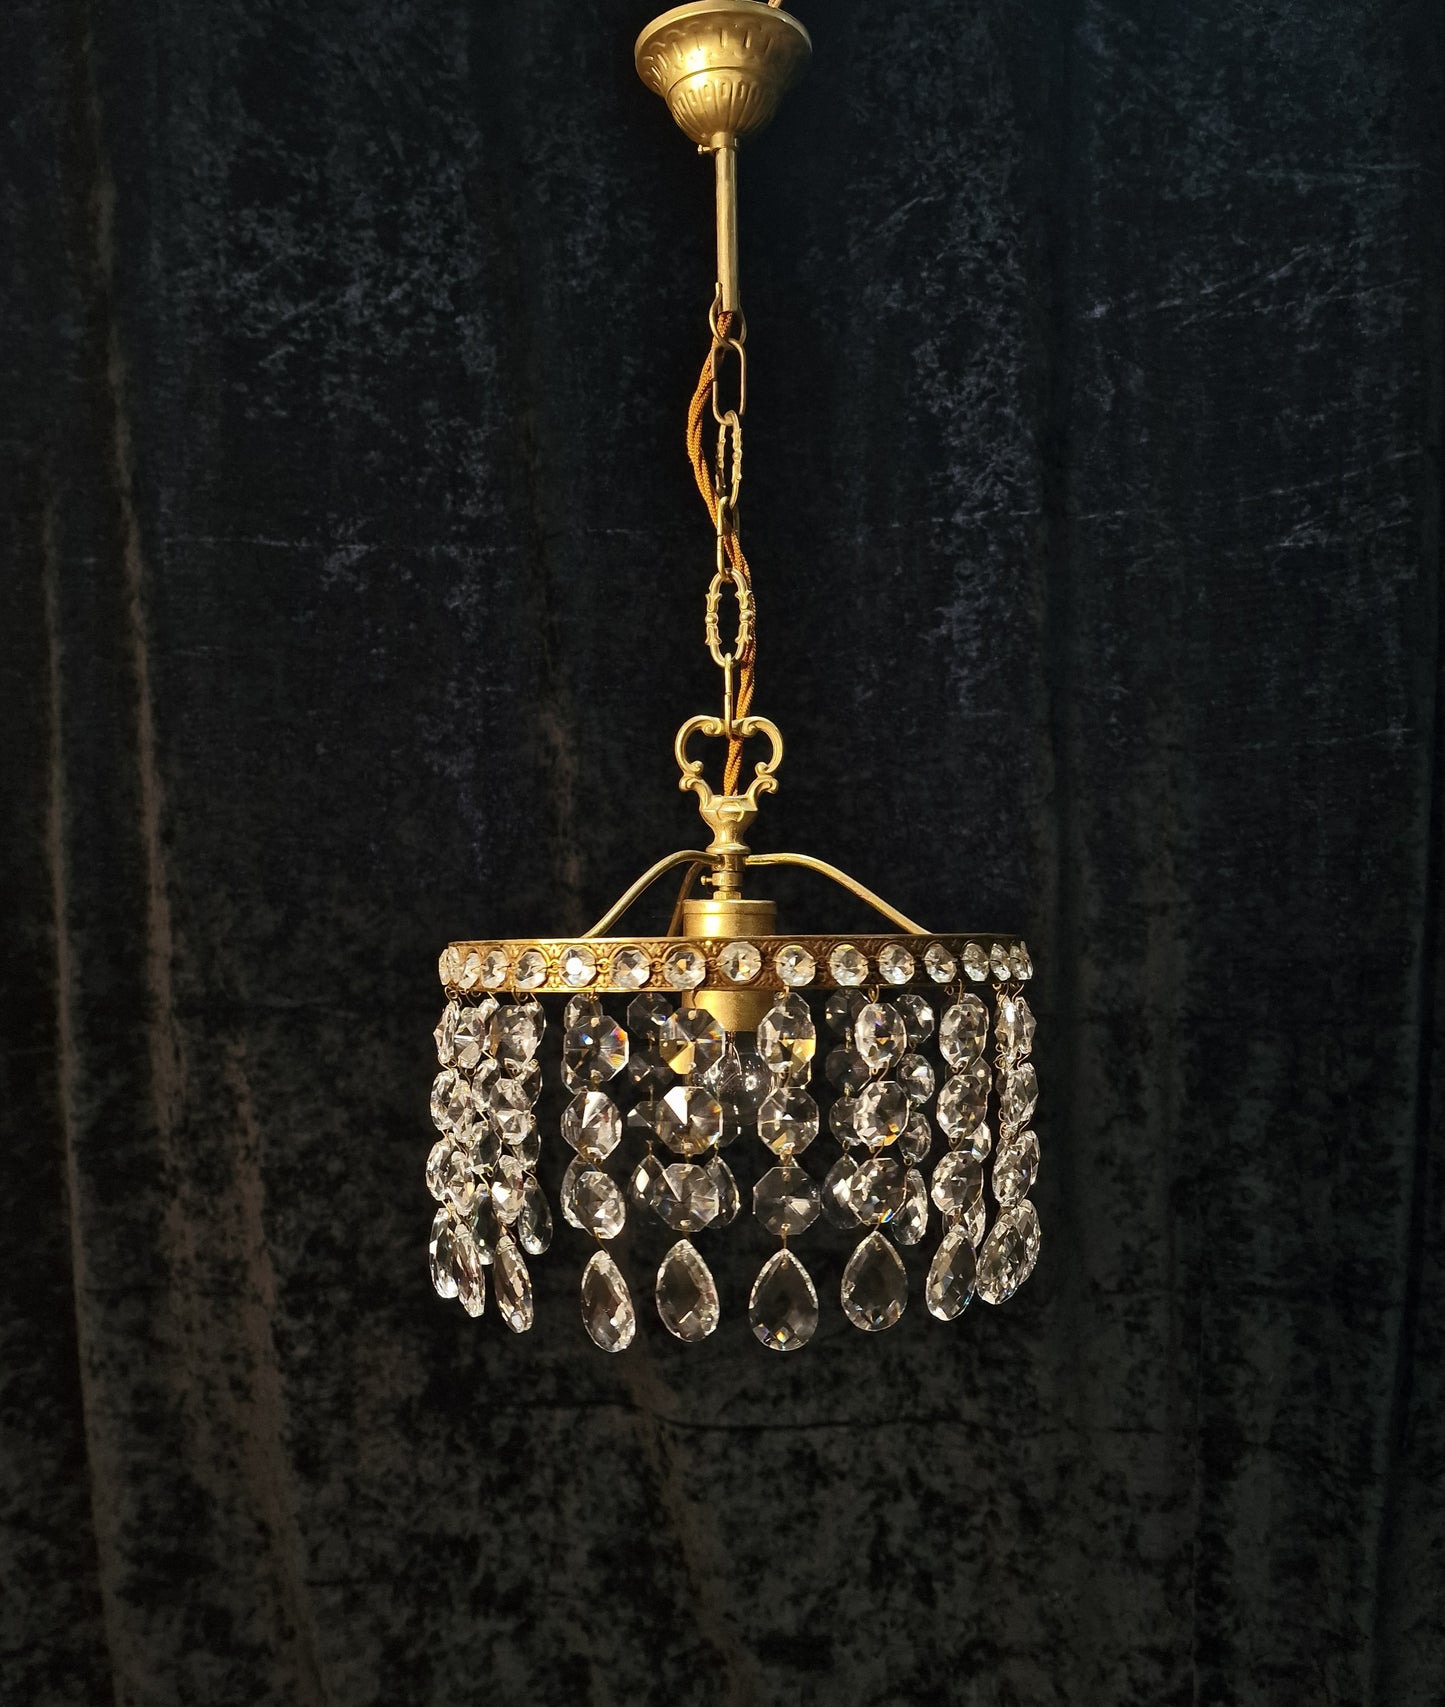 Lovely Vintage French 1 Light Brass Waterfall Crystal Circular Chandelier Light